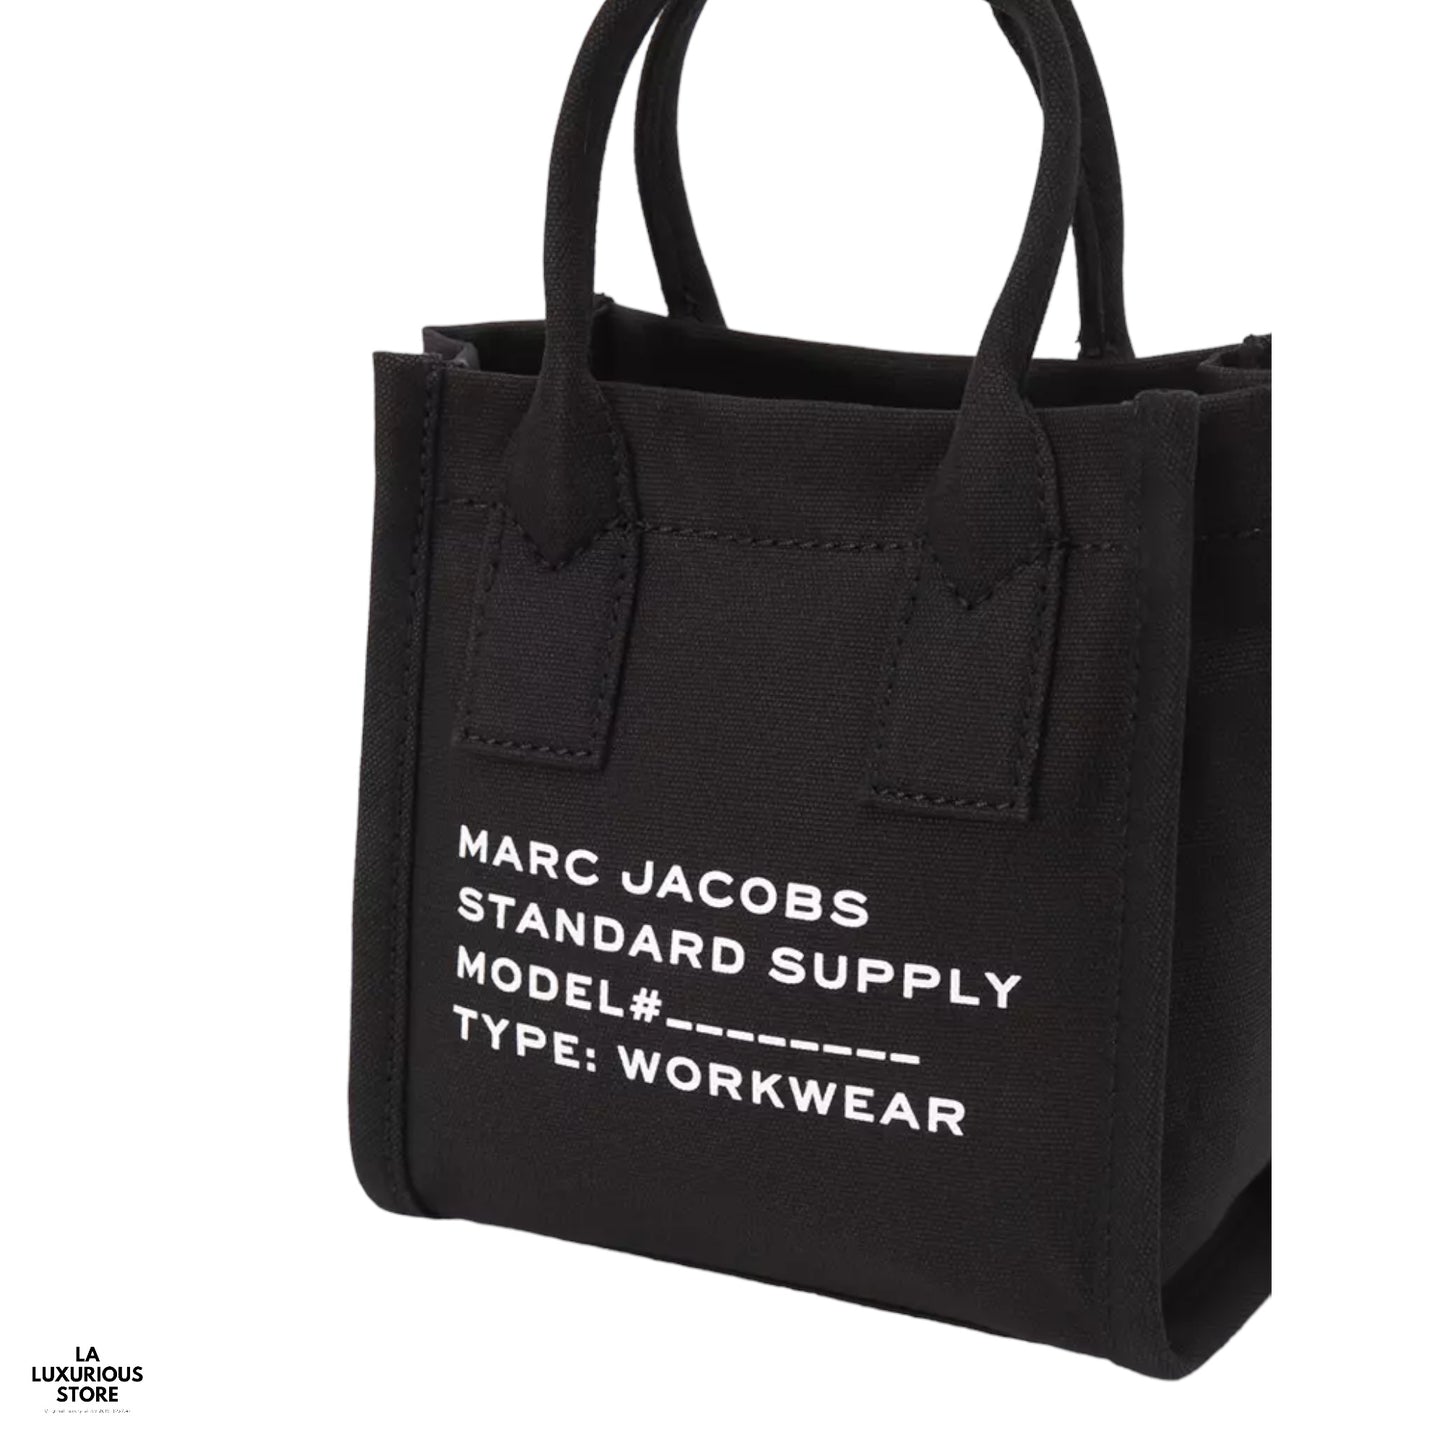 Marc Jacobs Workwear Small Black